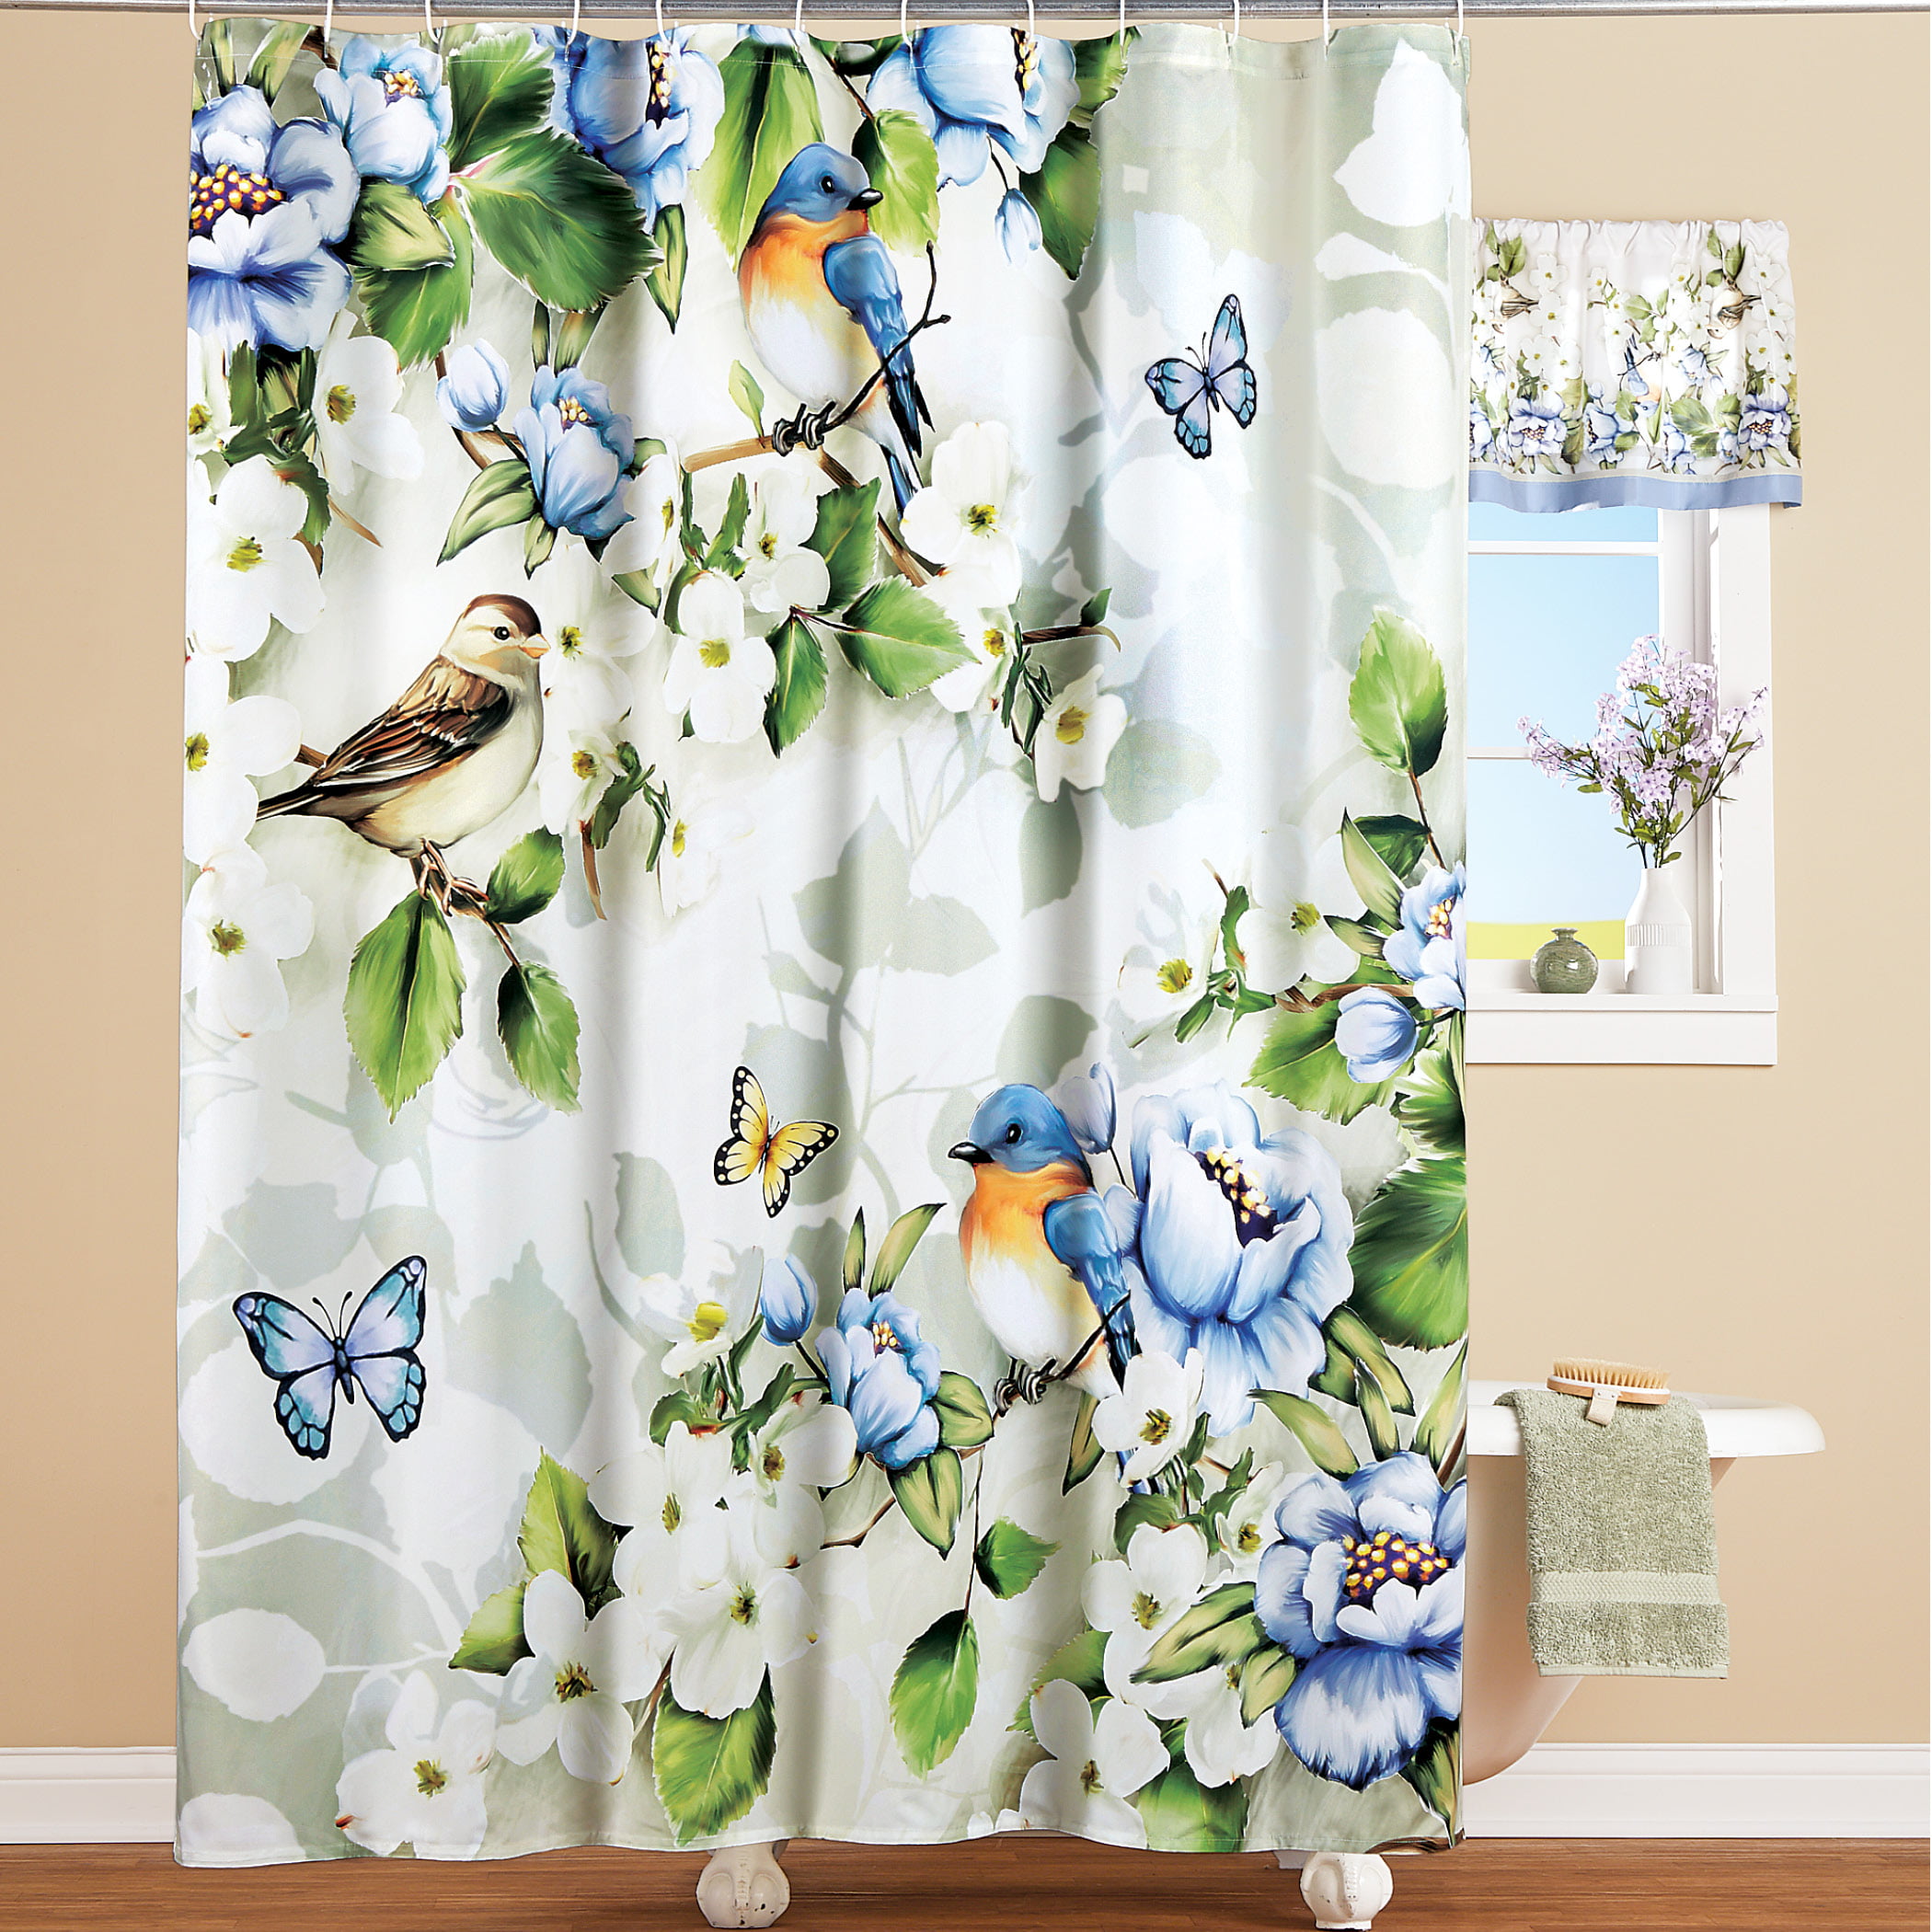 Forest Shower Curtain Flying Birds and Leaves Print for Bathroom 